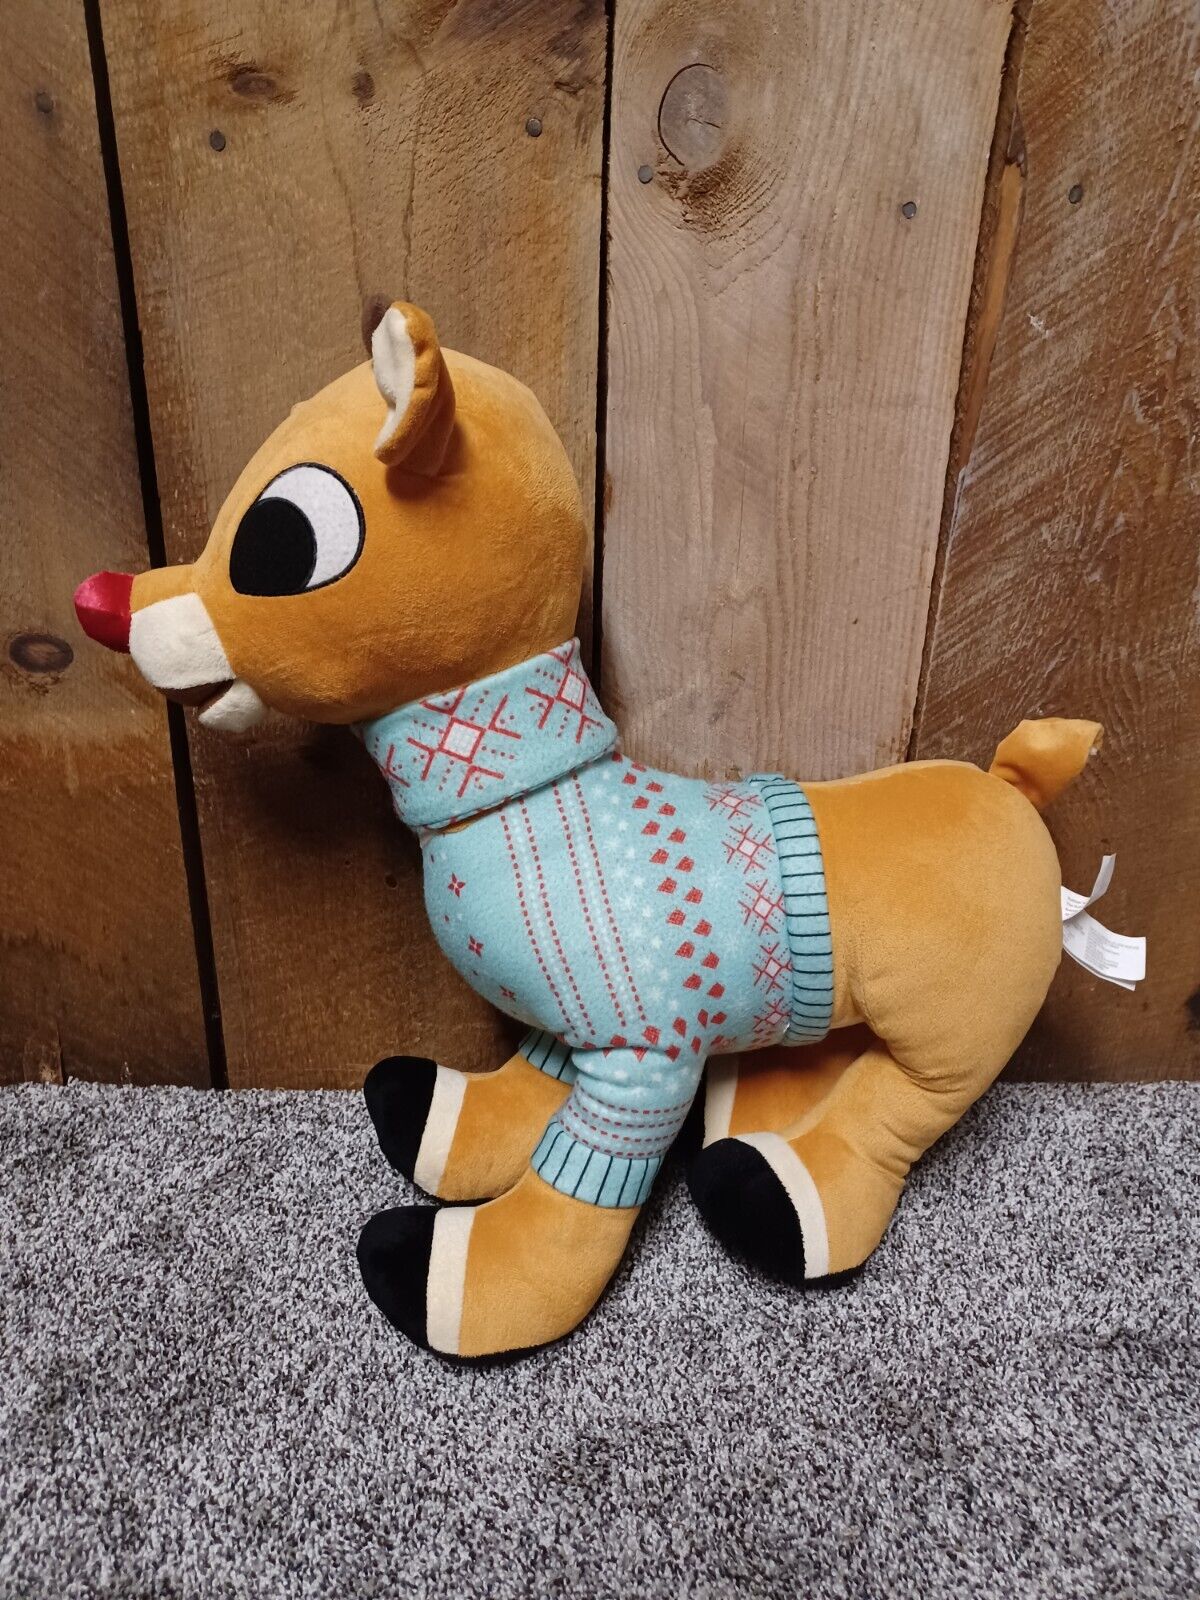 Huge 22”x 20” Rudolph The Red Nosed Reindeer Christmas Plush Stuffed Animal